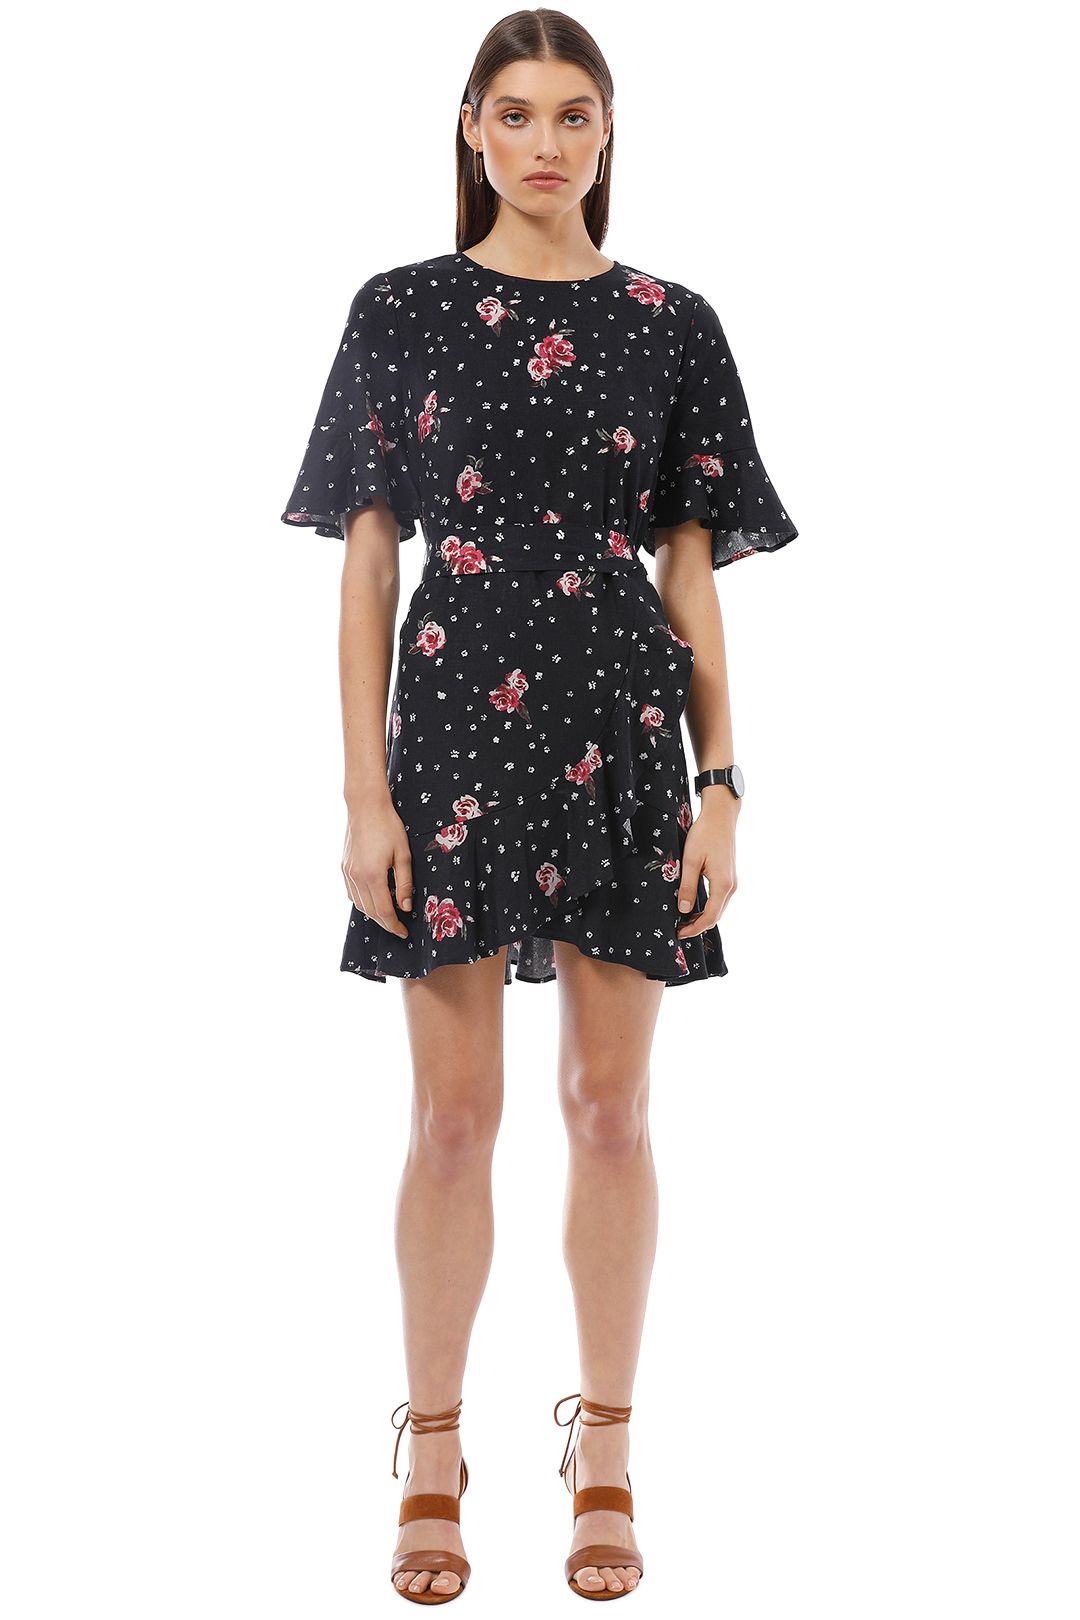 Rodeo Show - Midnight Dress - Black Floral - Front